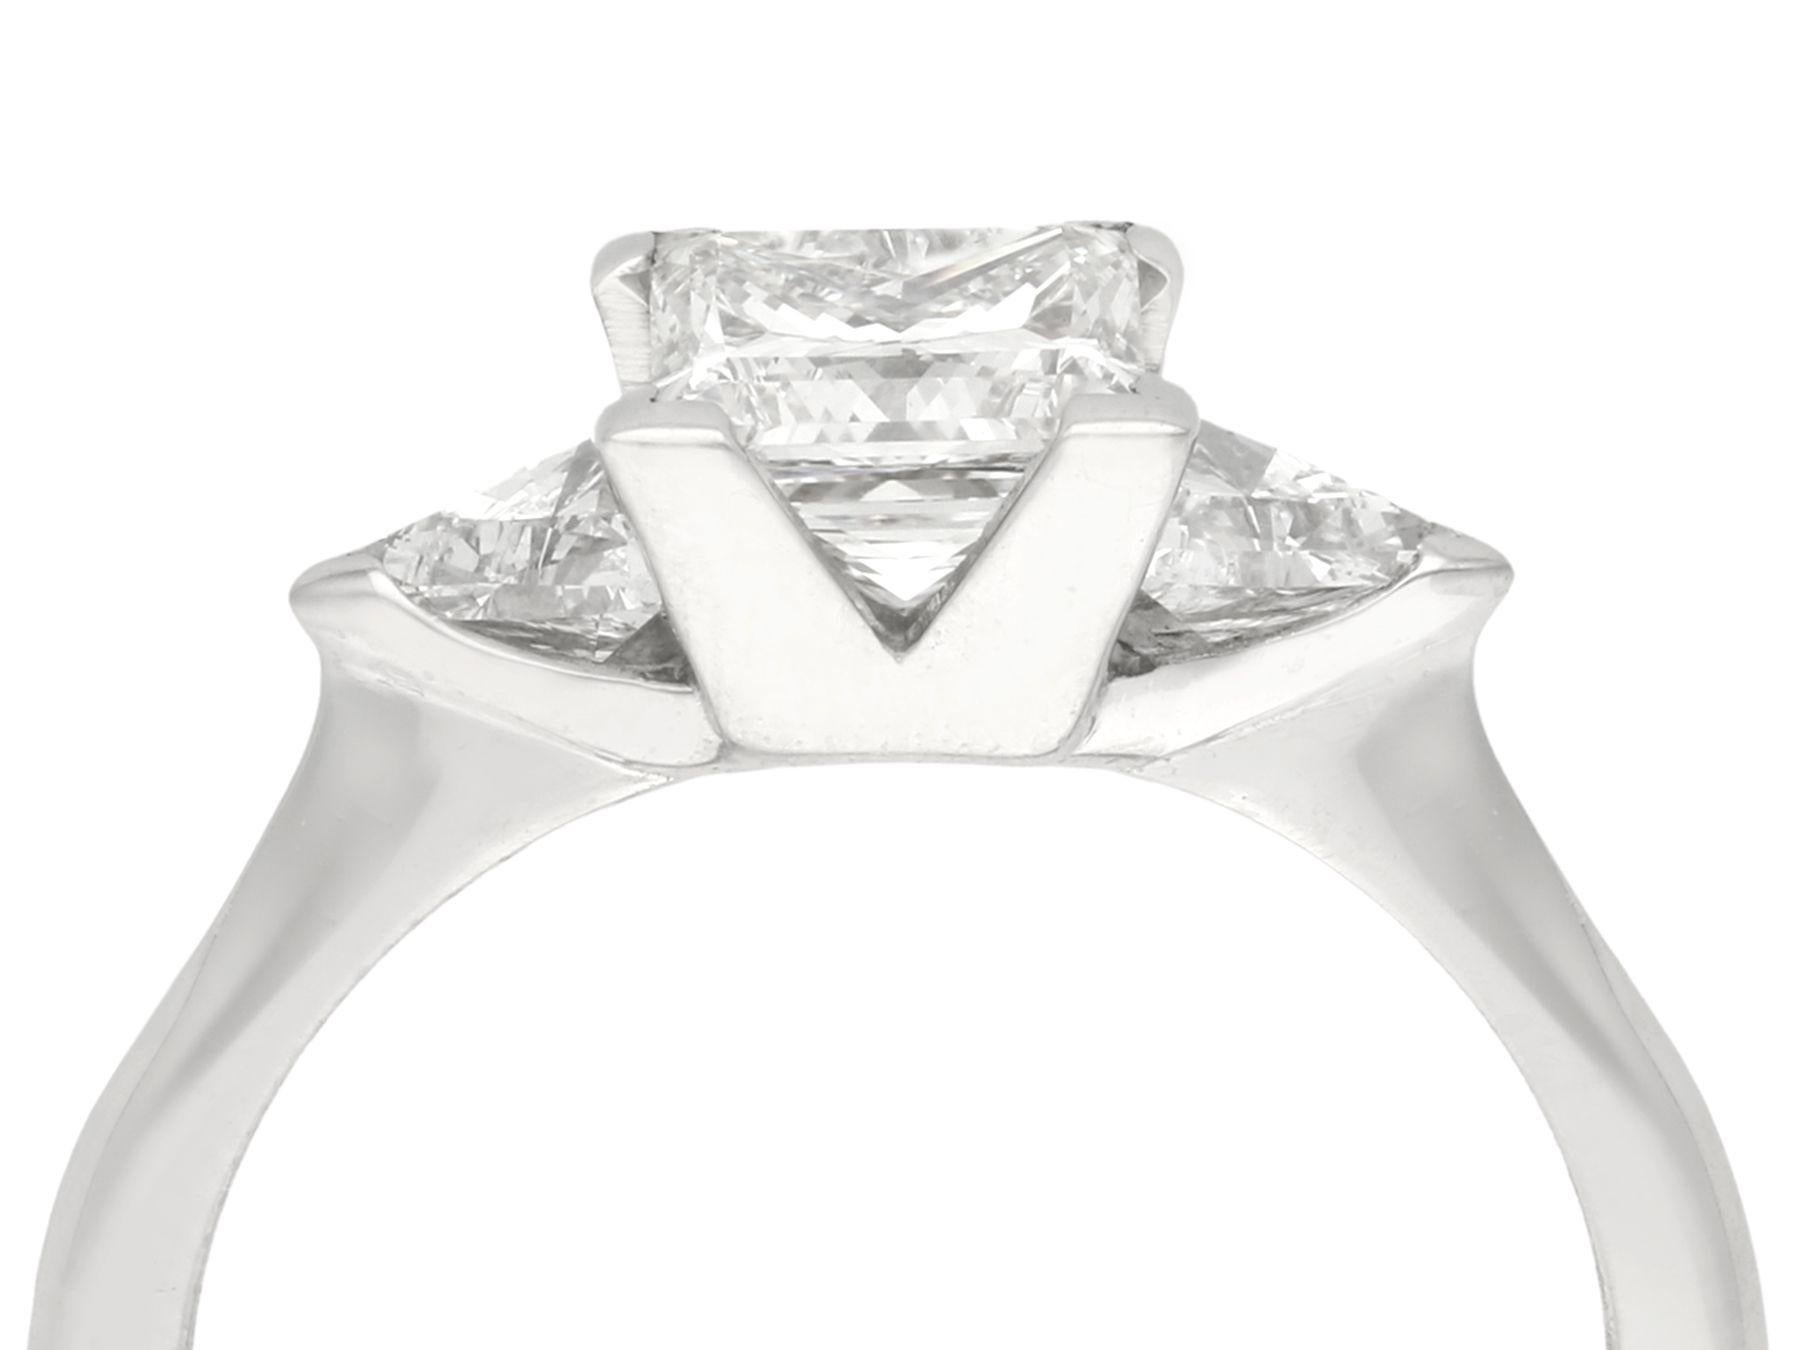 A stunning, fine and impressive 1.87 carat diamond and platinum contemporary three stone ring; part of our diverse diamond jewelry collections.

This stunning contemporary princess cut diamond engagement ring has been crafted in platinum.

The